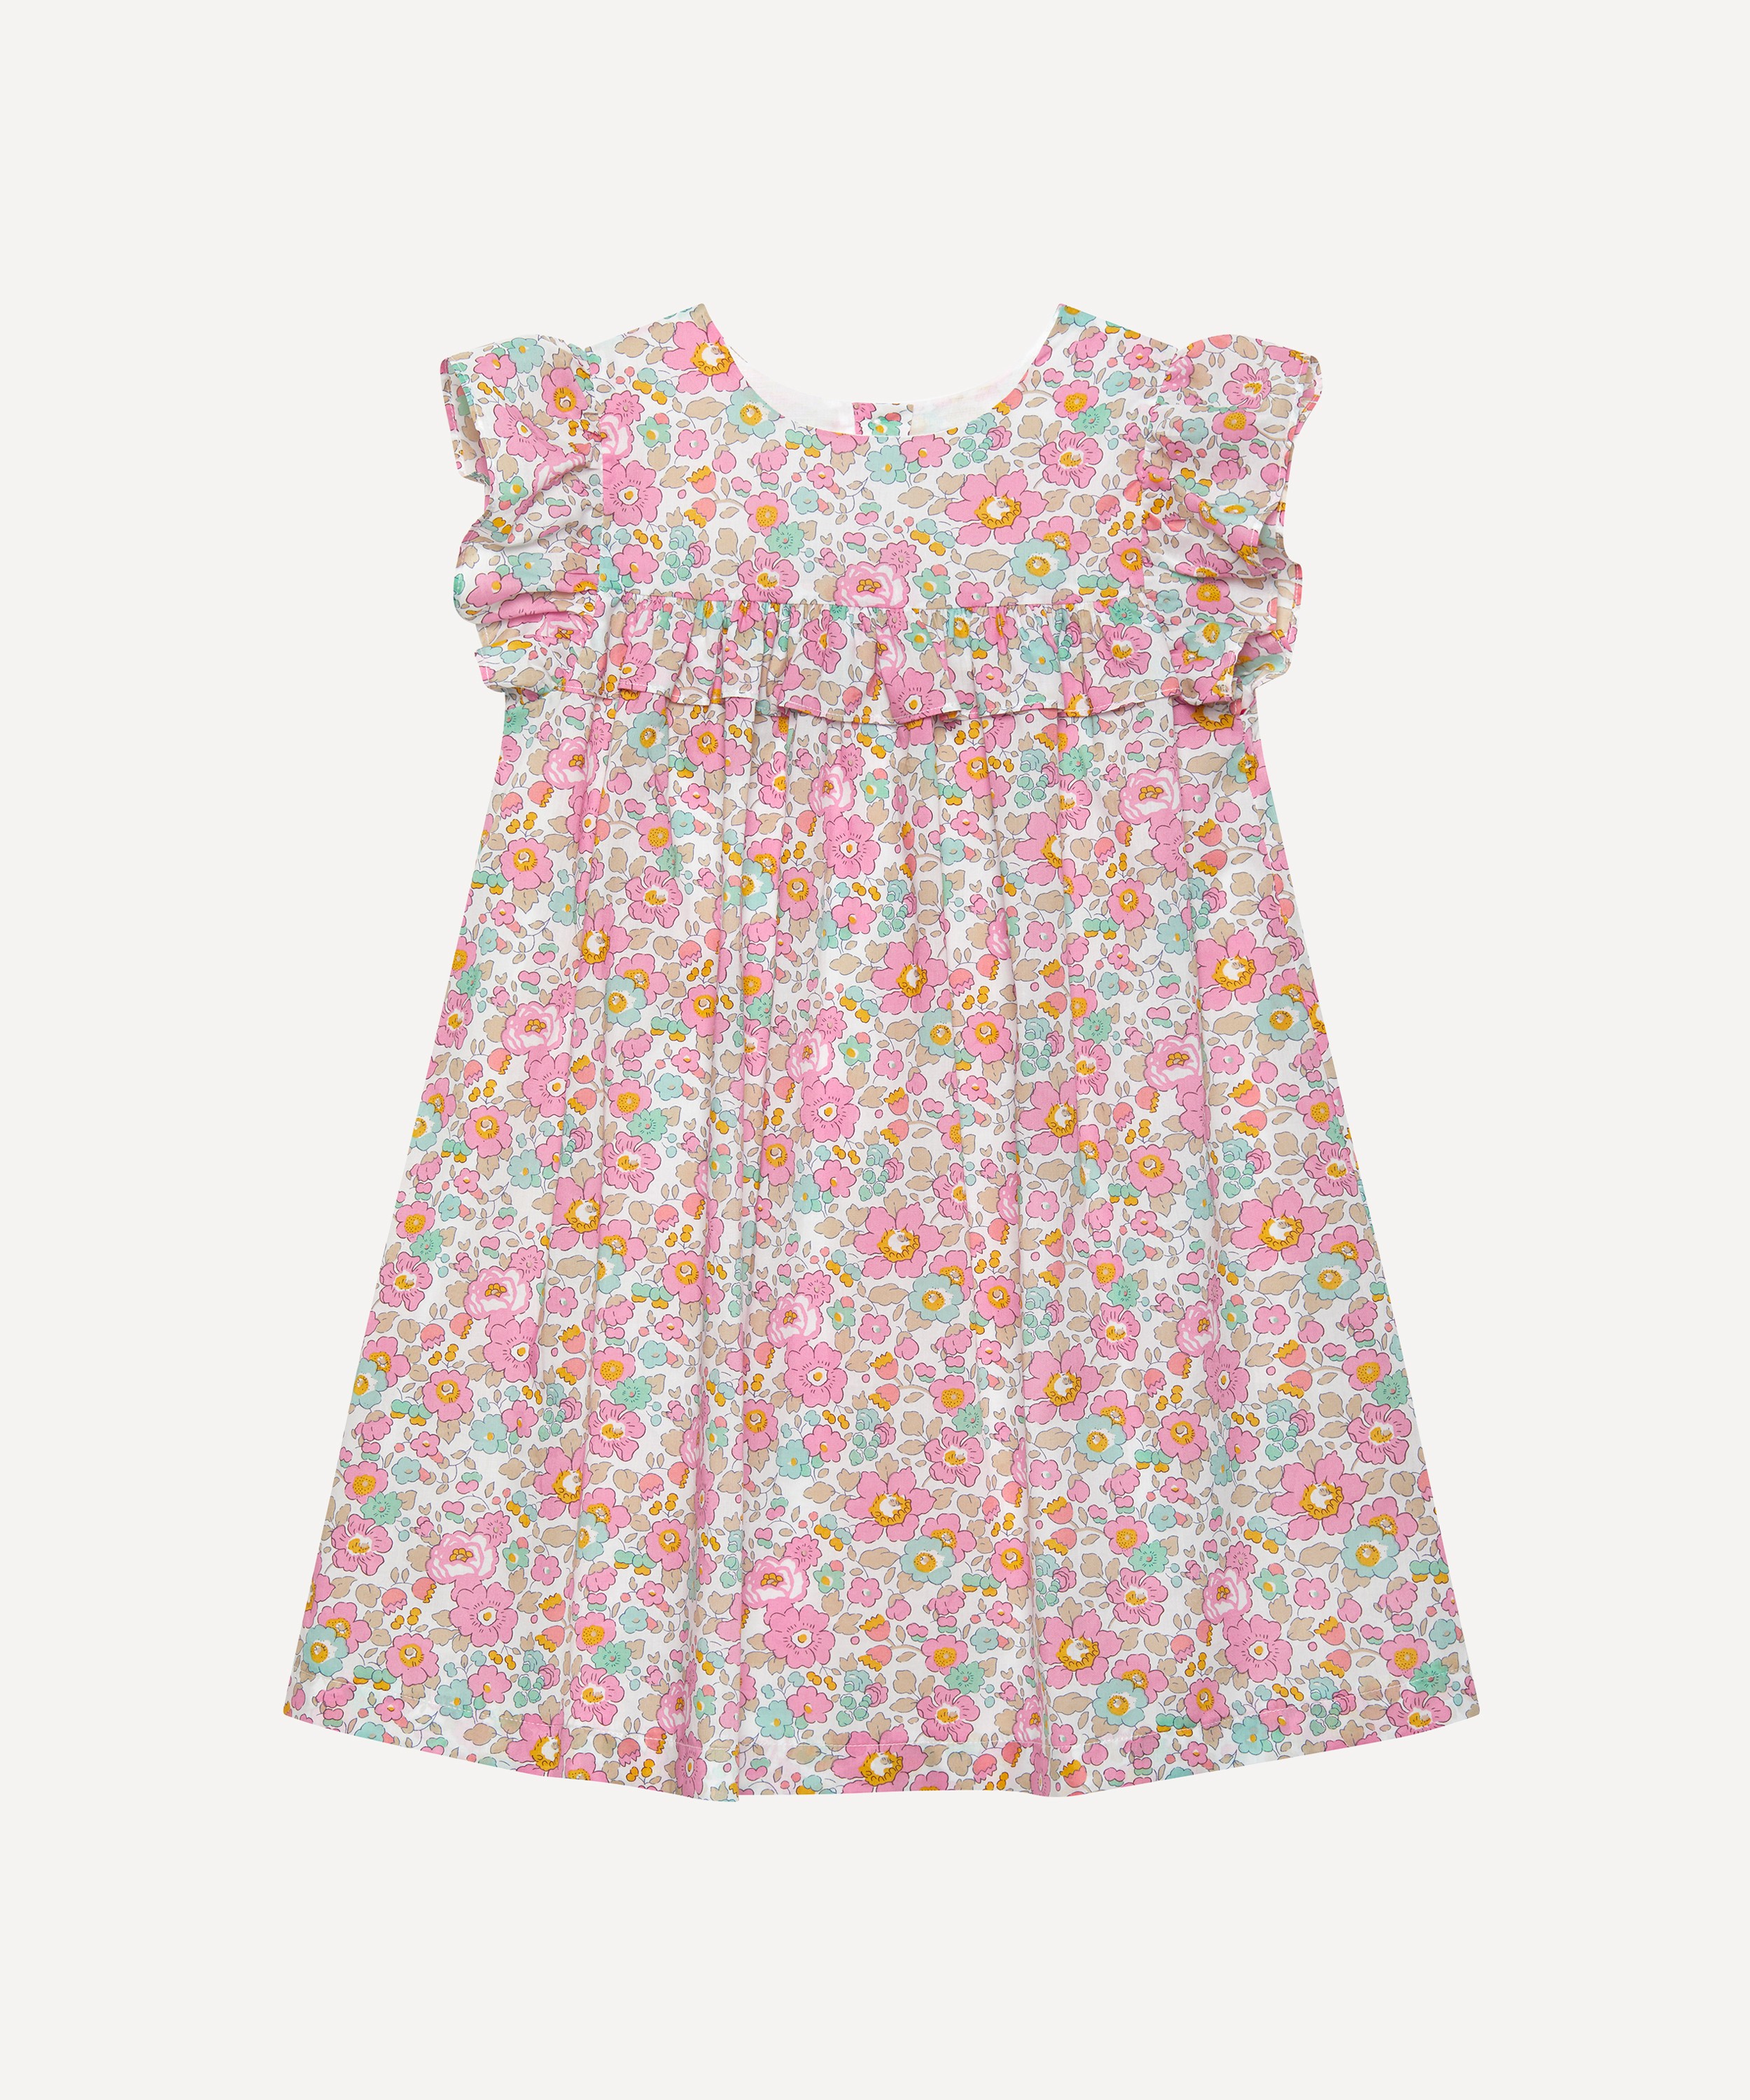 Trotters - Betsy Ruffle Dress 8-11 Years image number 0